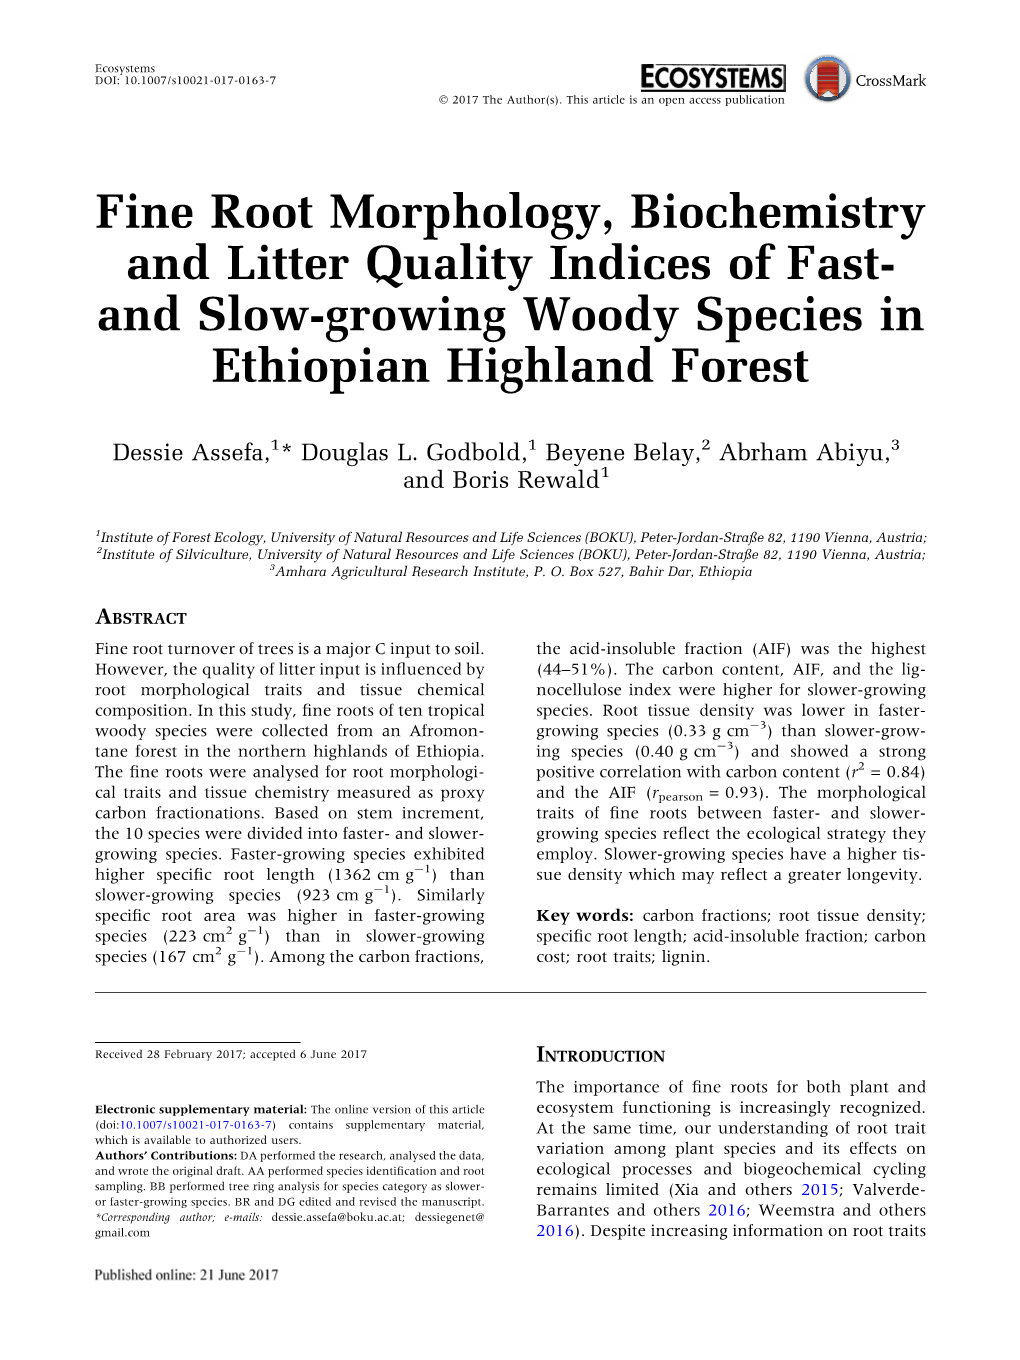 Fine Root Morphology, Biochemistry and Litter Quality Indices of Fast- and Slow-Growing Woody Species in Ethiopian Highland Forest